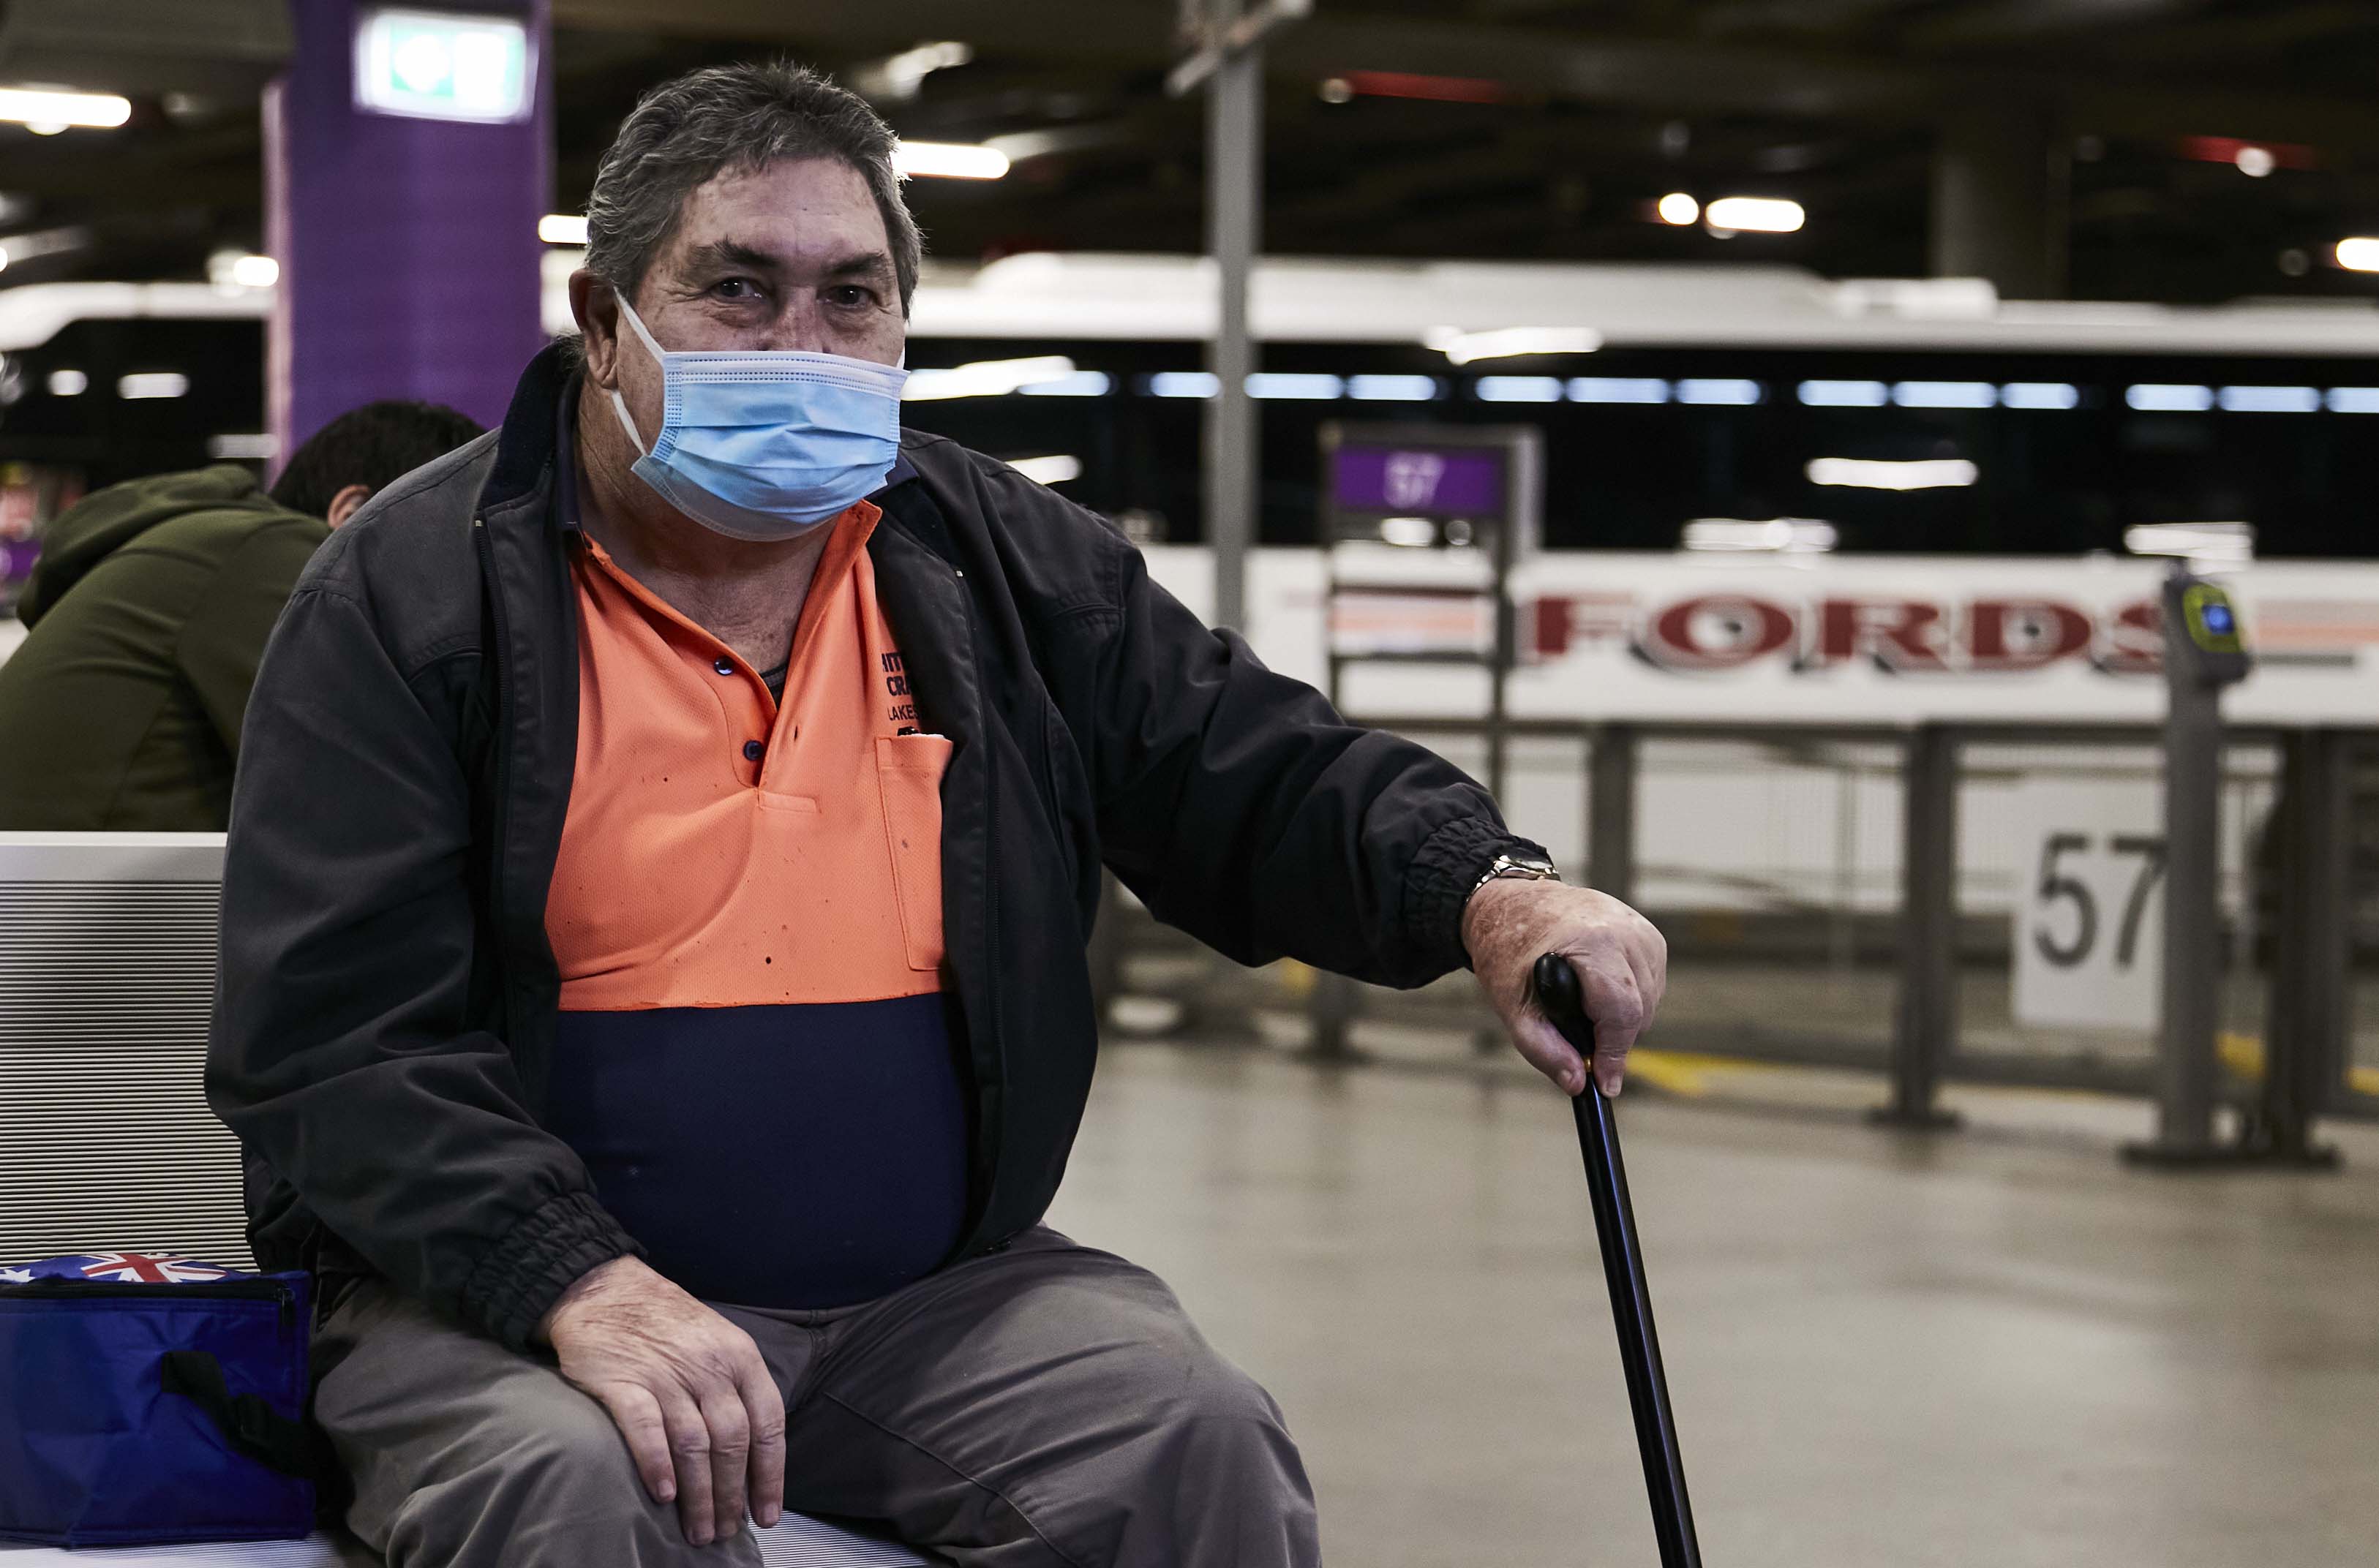 Image shows a middle aged man sitting in a bus depot. He is wearing a face mask and a high-vis shirt. He has a walking stick in his left hand.